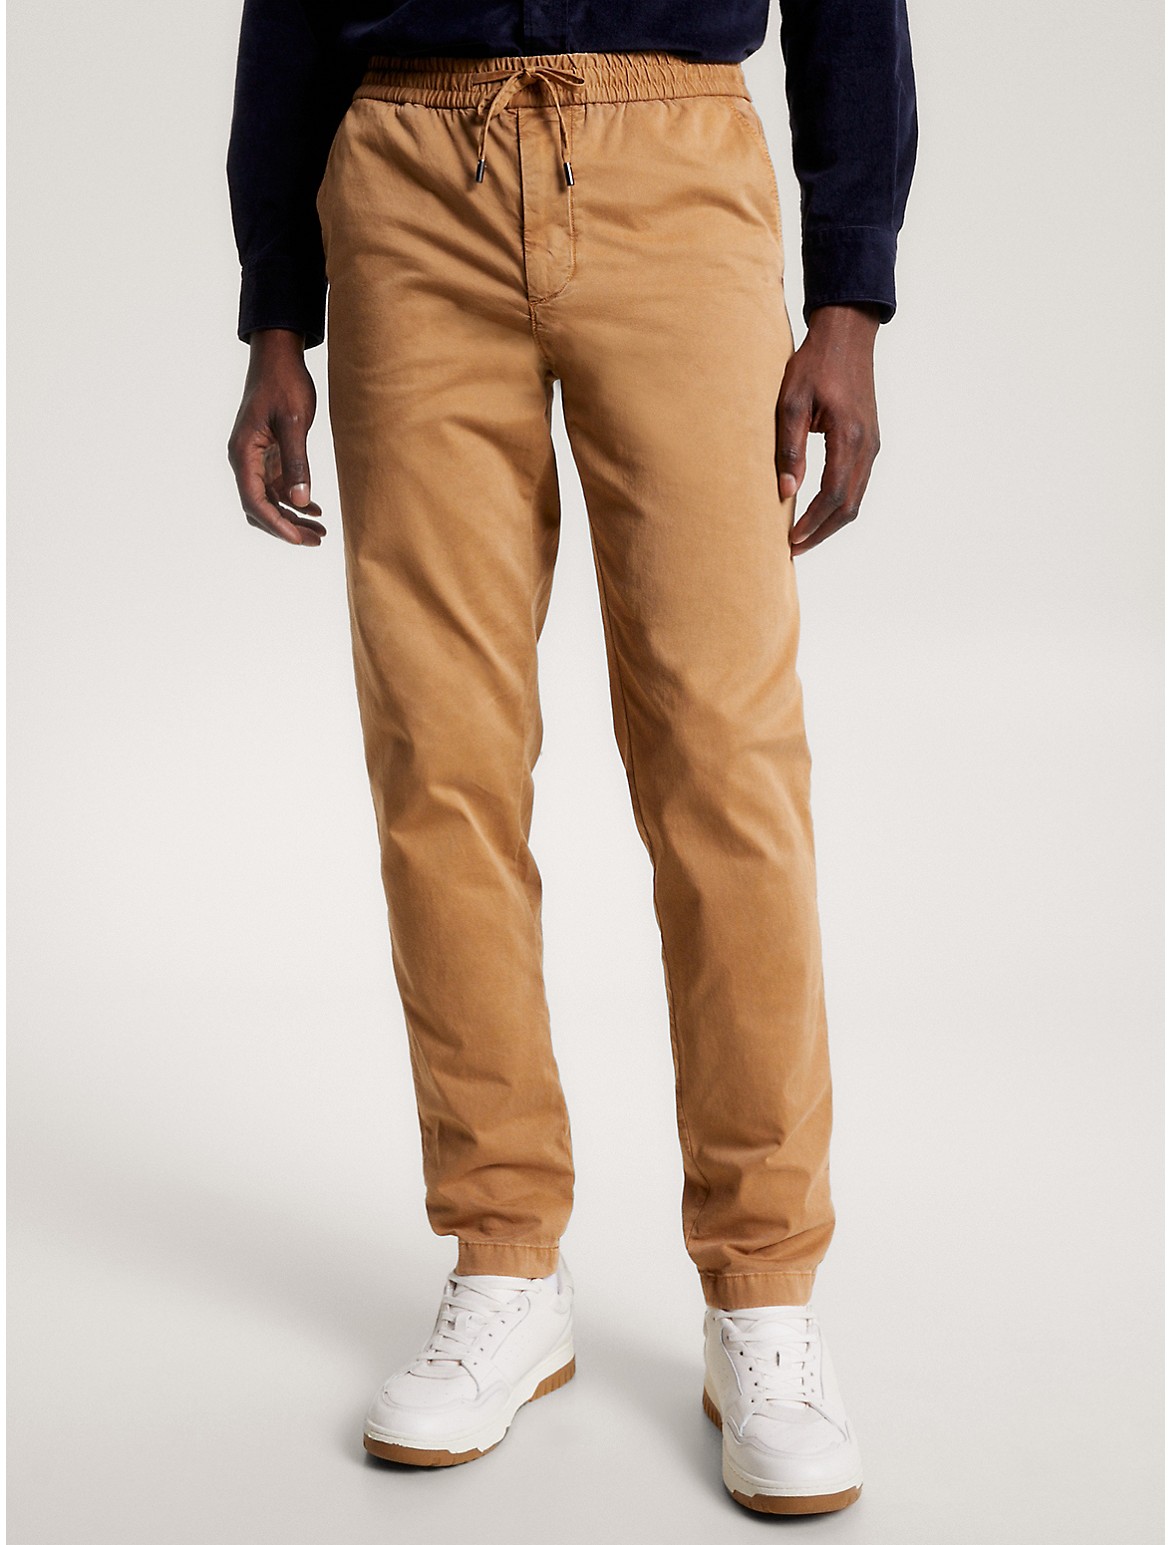 Tommy Hilfiger Men's Relaxed Tapered Garment-Dyed Chino